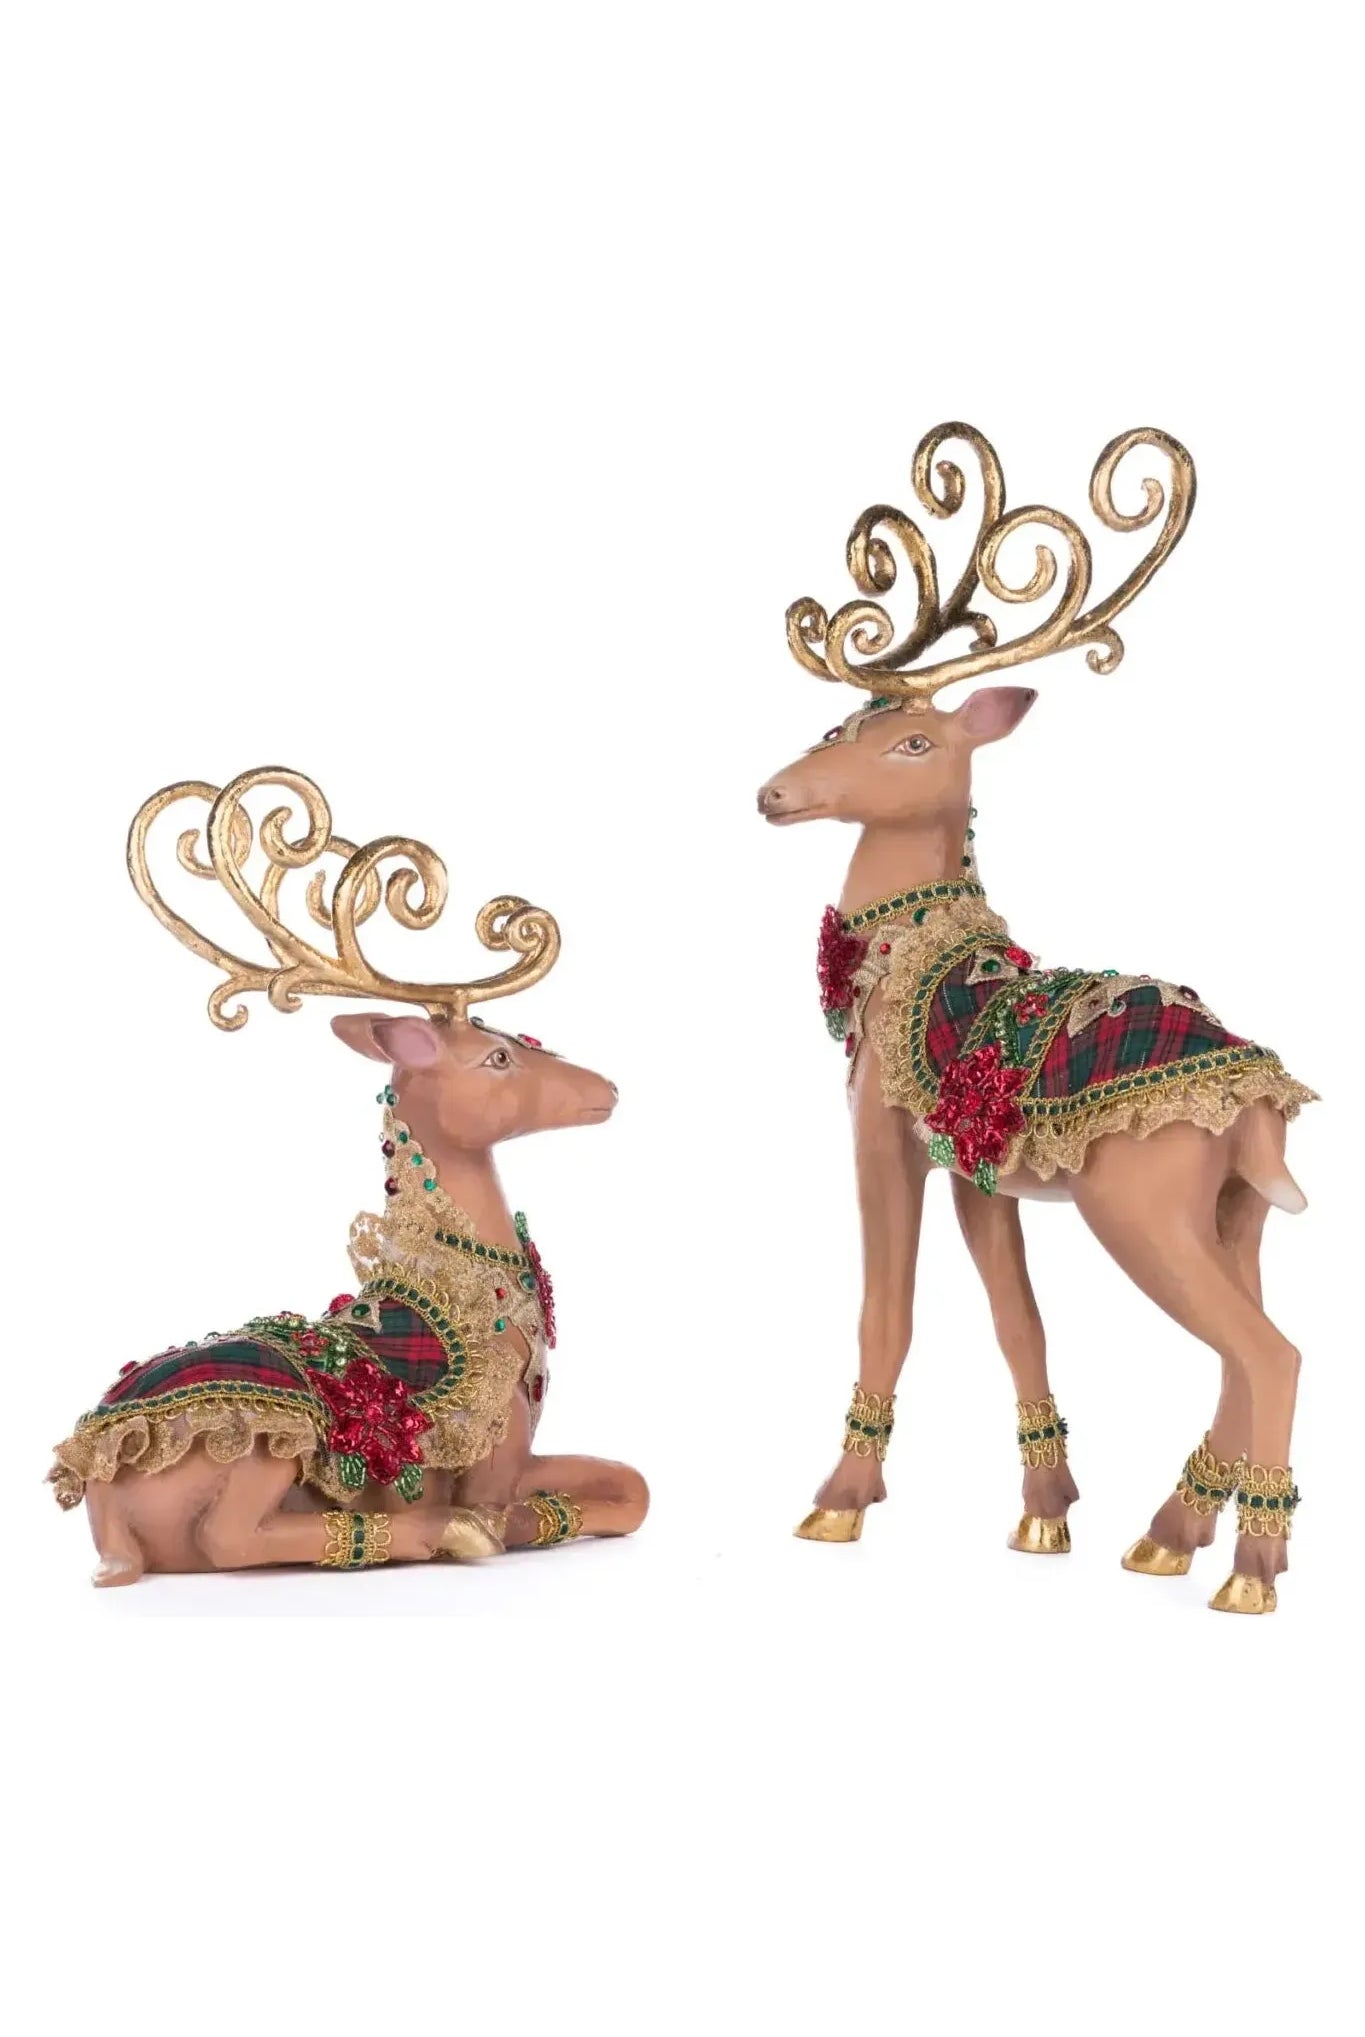 Shop For Holiday Magic Deer Assortment of 2 28-428523